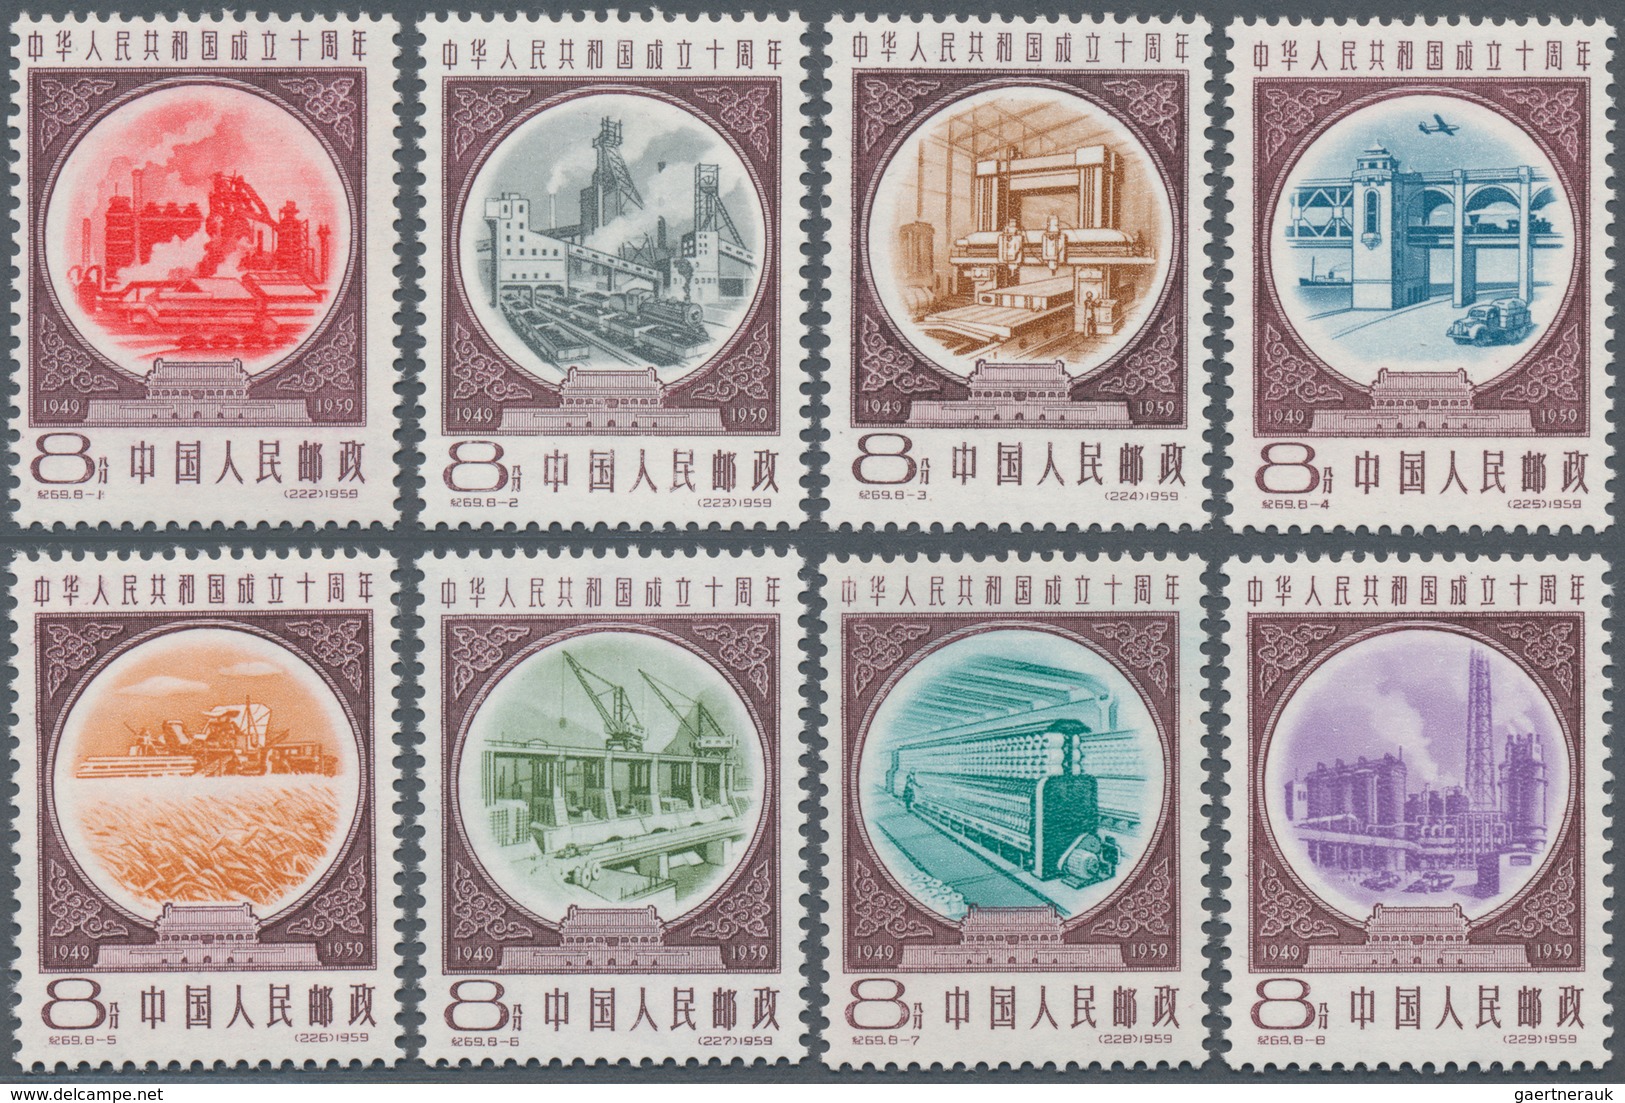 China - Volksrepublik: 1959/1962, six issues: Harvest block of four (C60) unused no gum as issued, 4